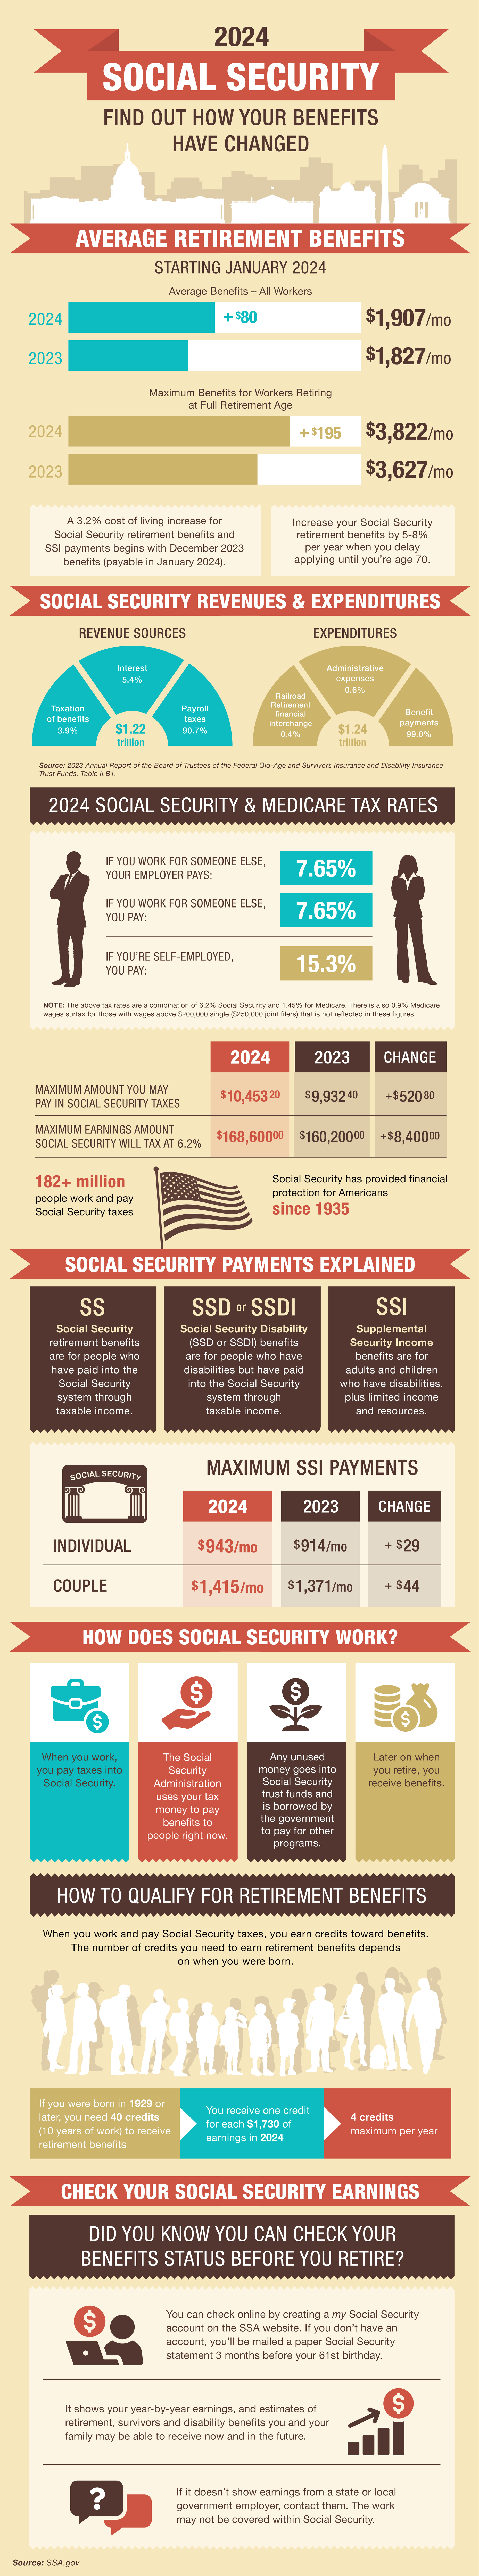 Social Security Infographic